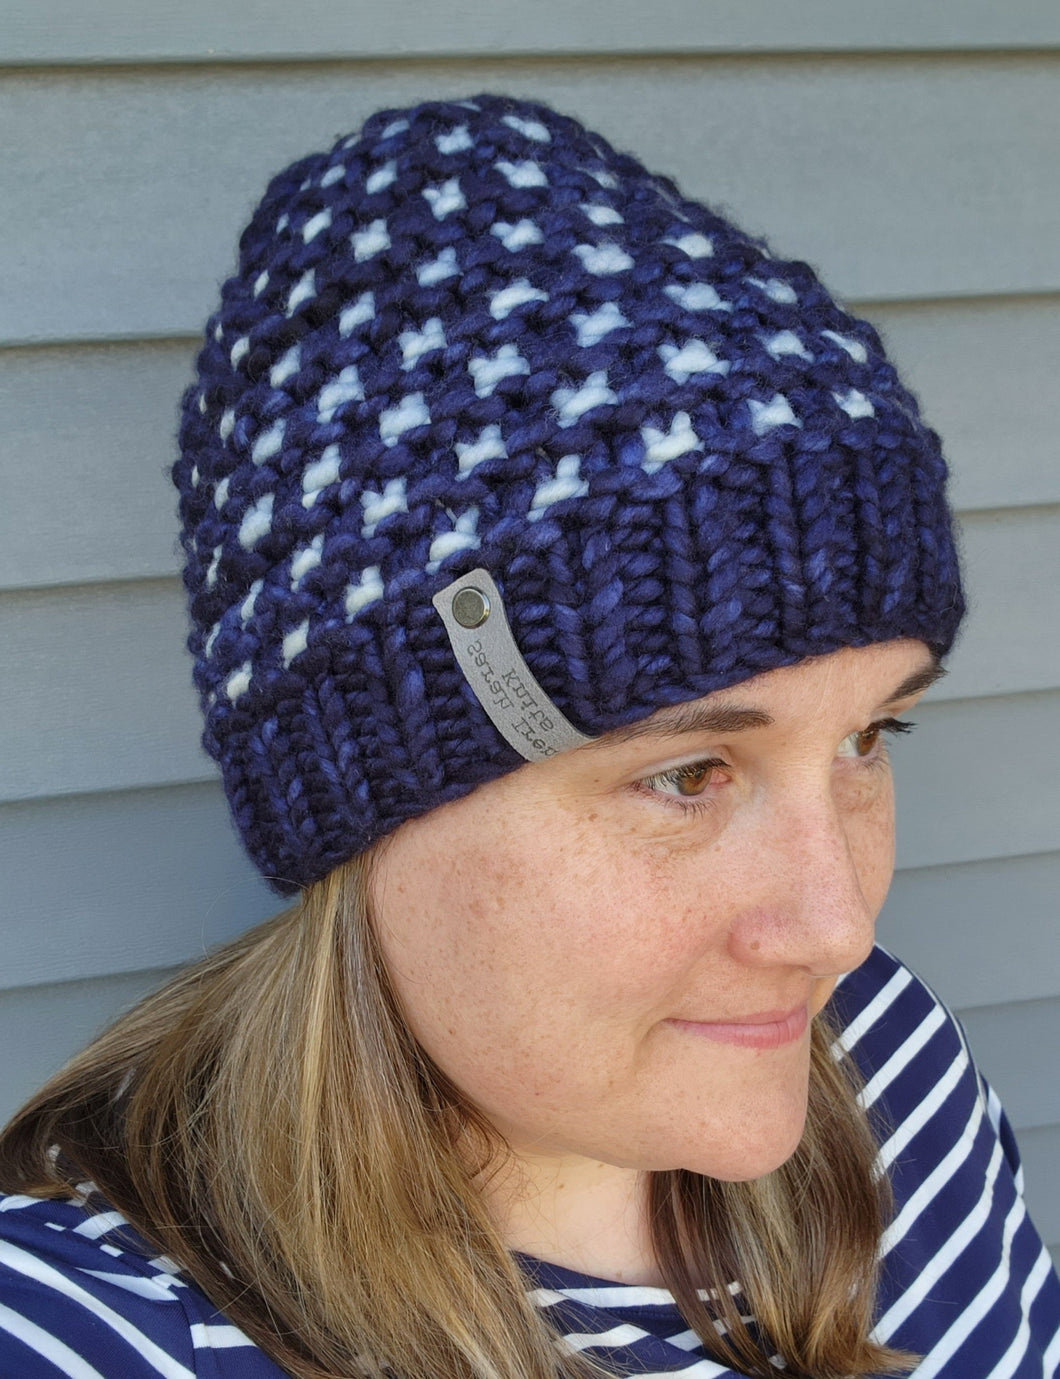 Windowpane effect beanie in navy and light blue. No pom.